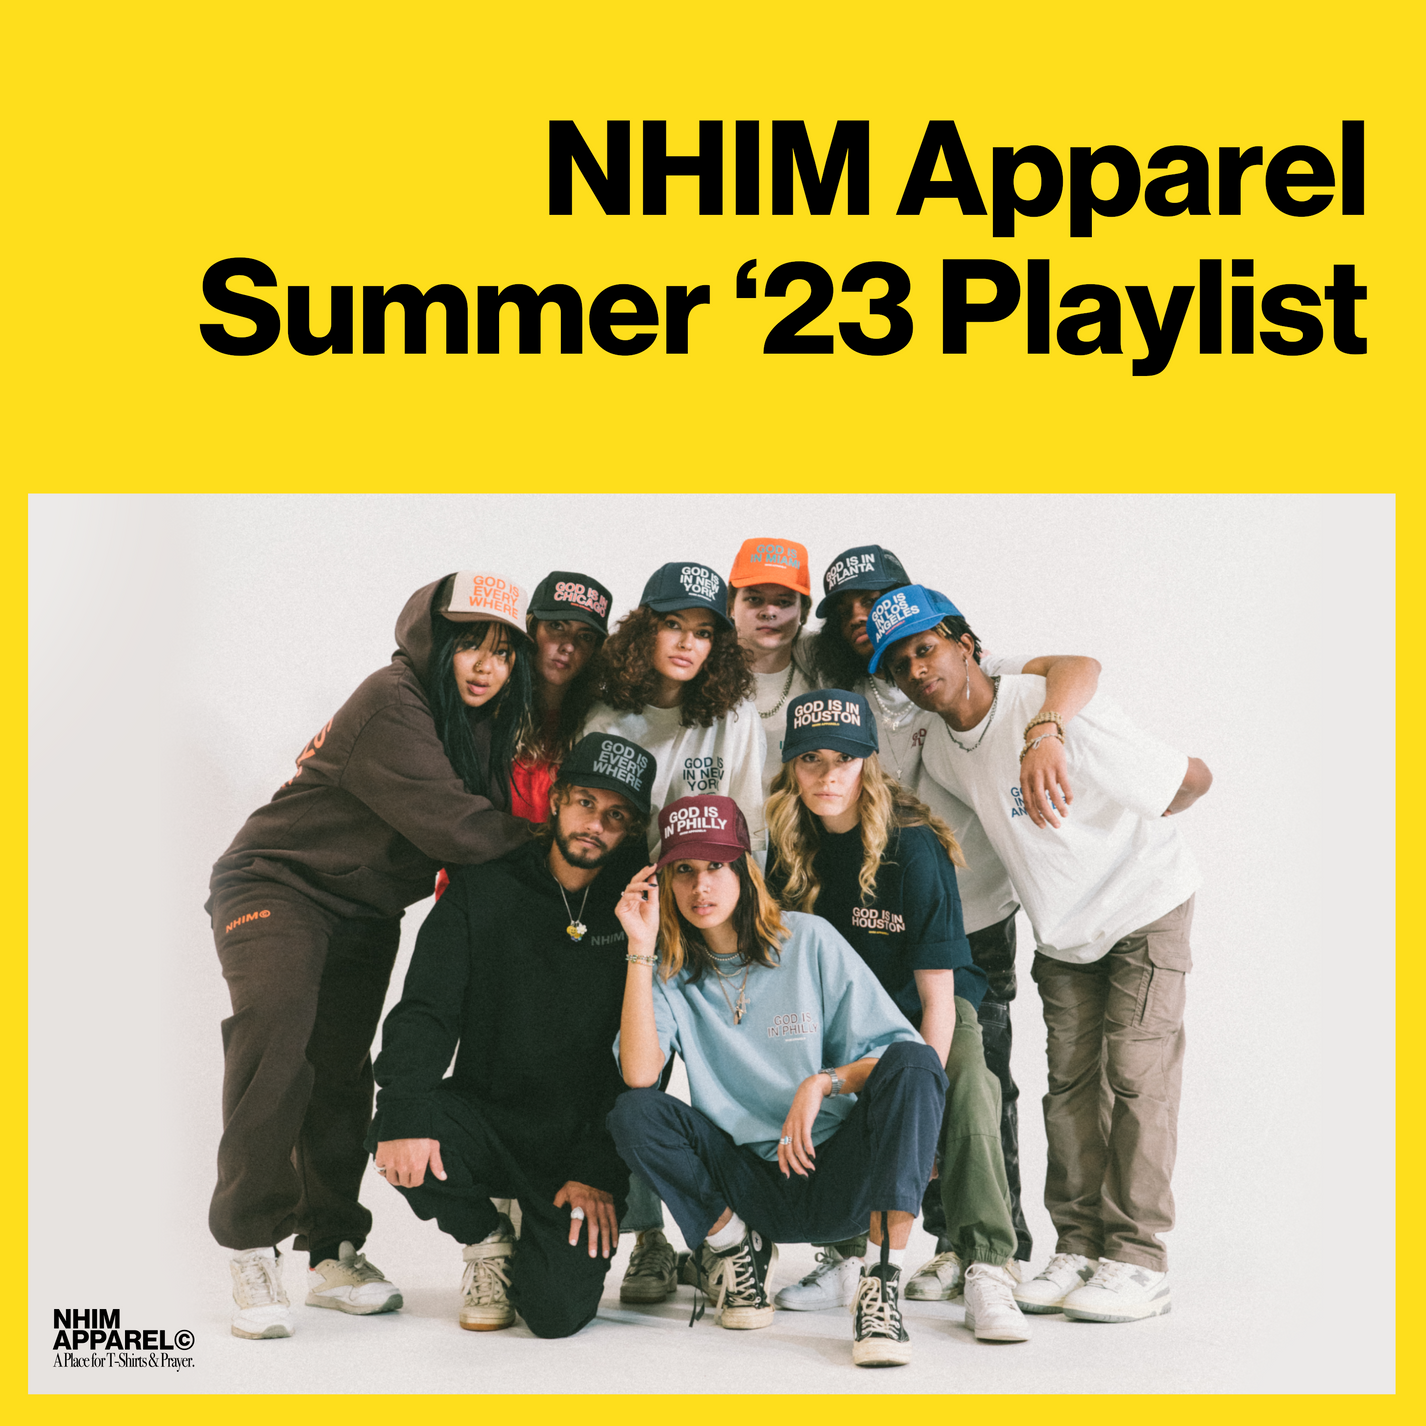 NHIM Apparel's 2023 Spotify Summer Playlist. Group photo of people in NHIM APPAREL clothing and hats grouped together.